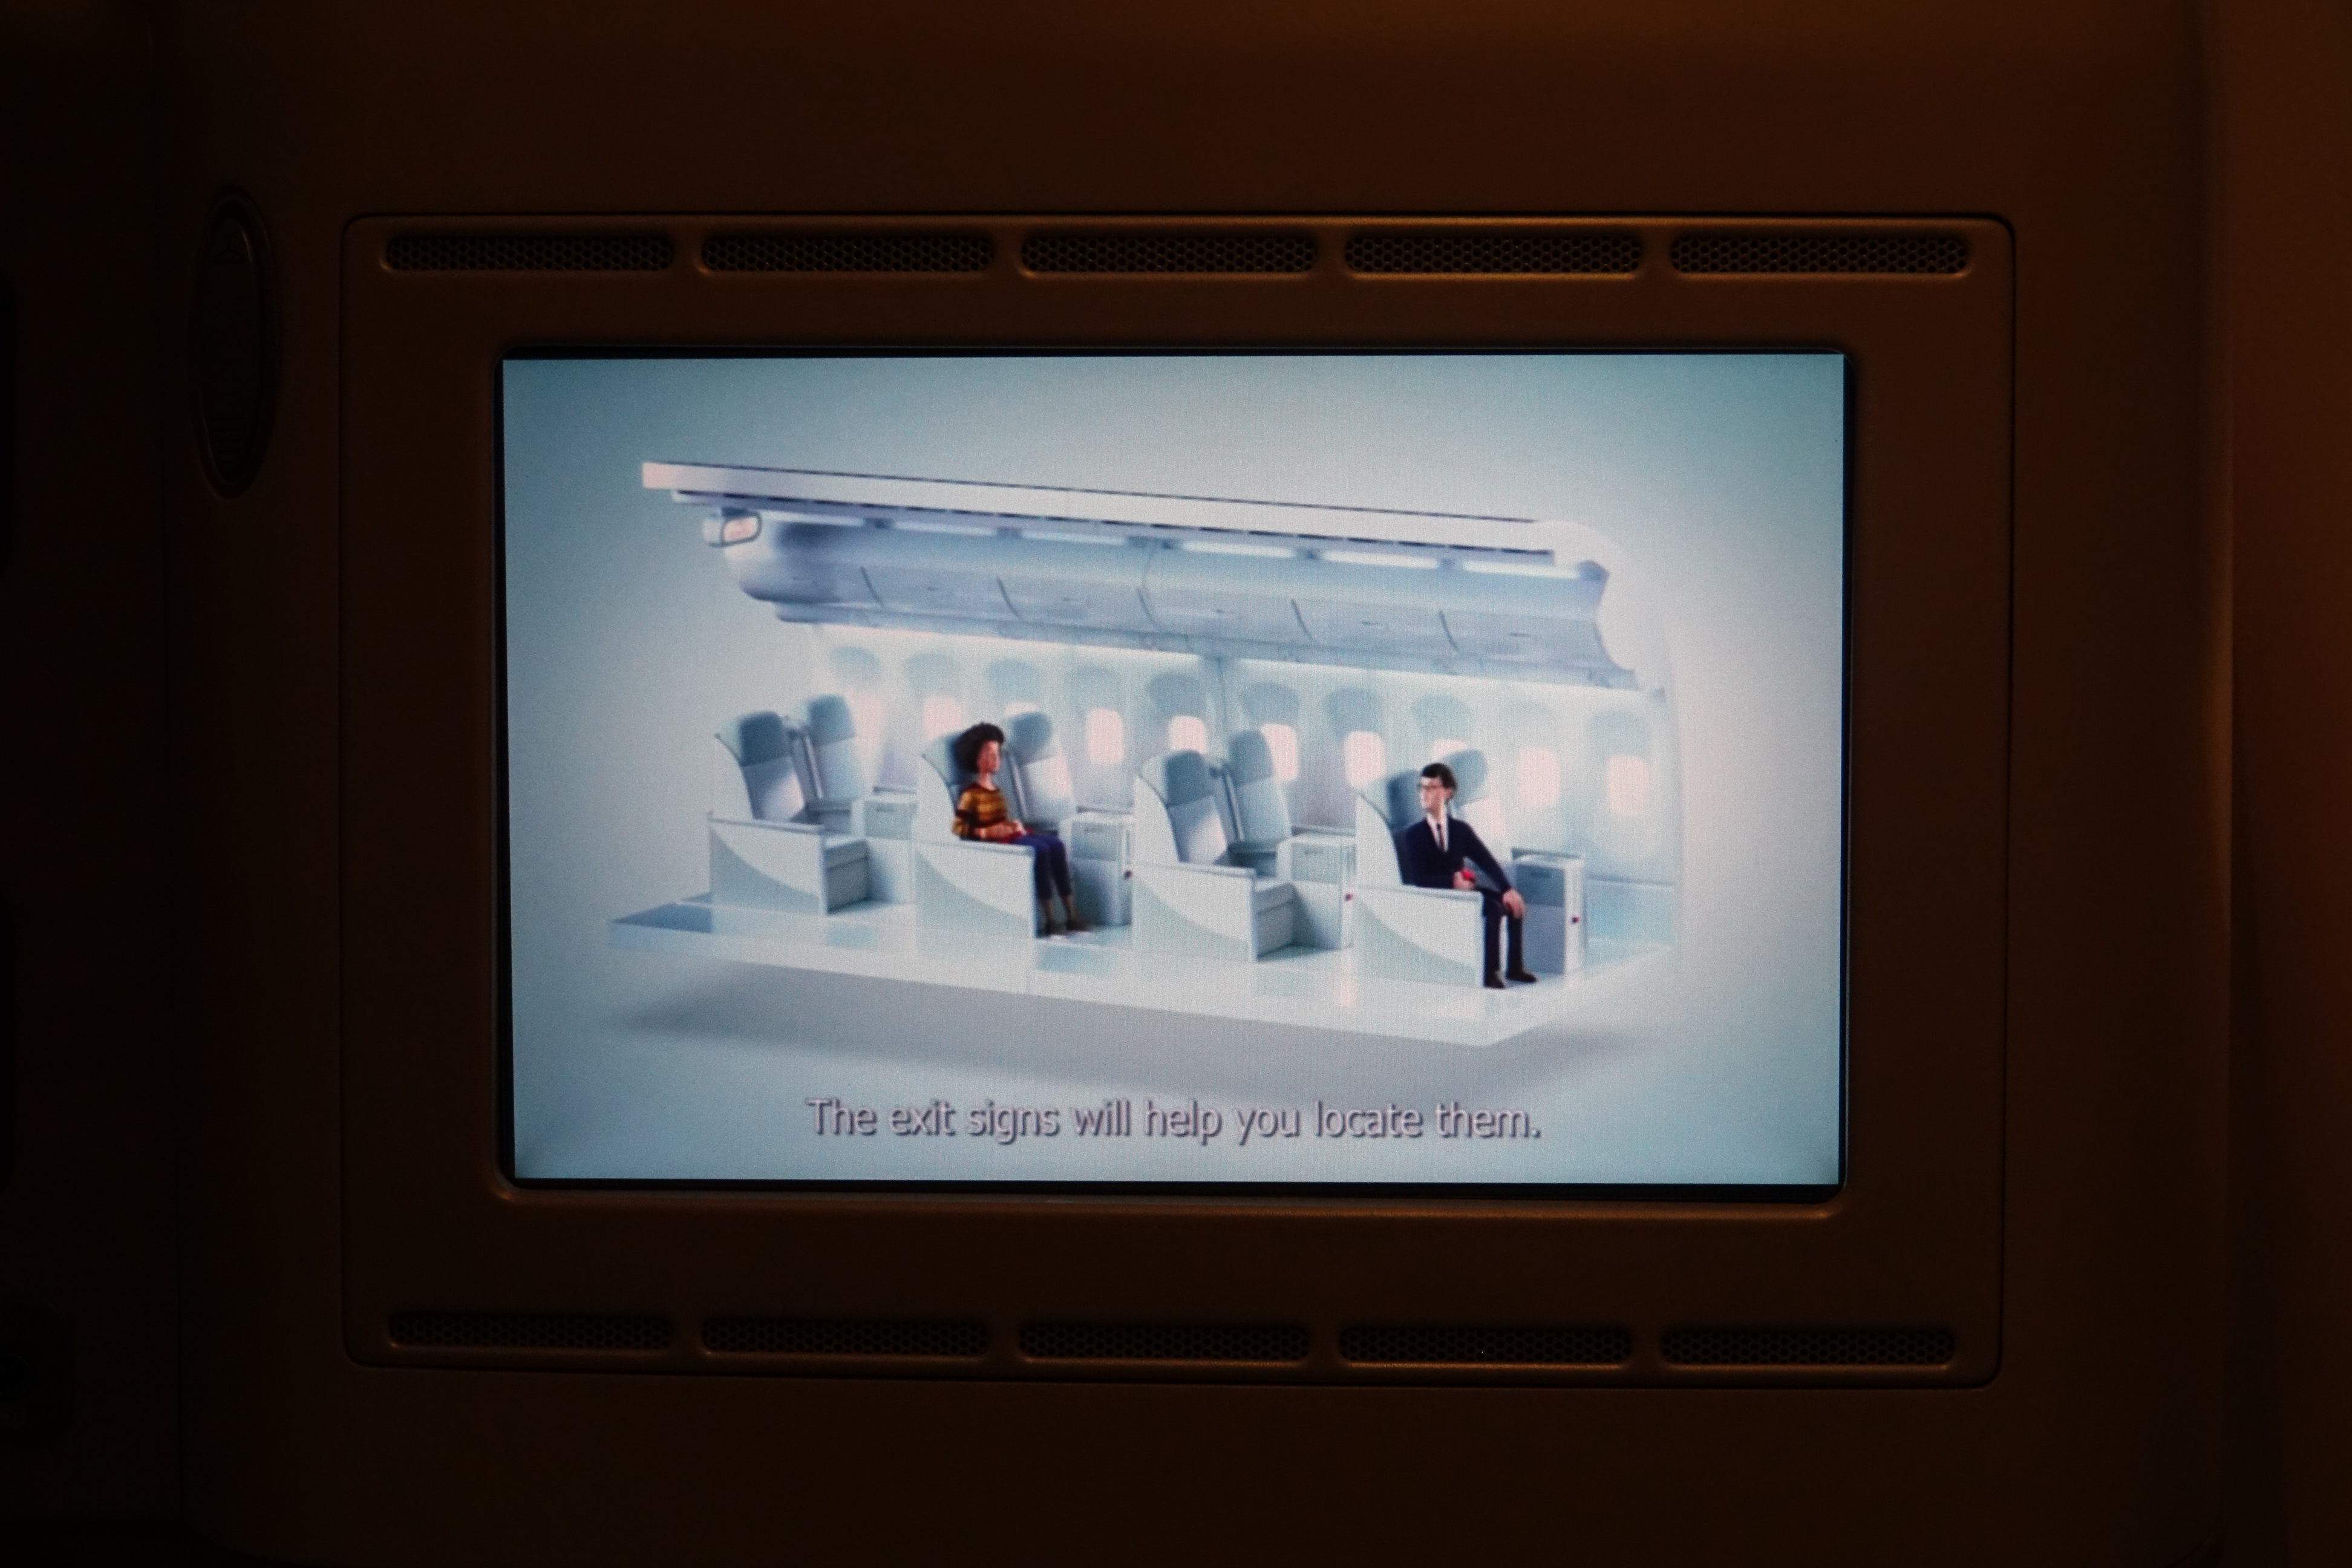 a screen showing a man and woman sitting in an airplane